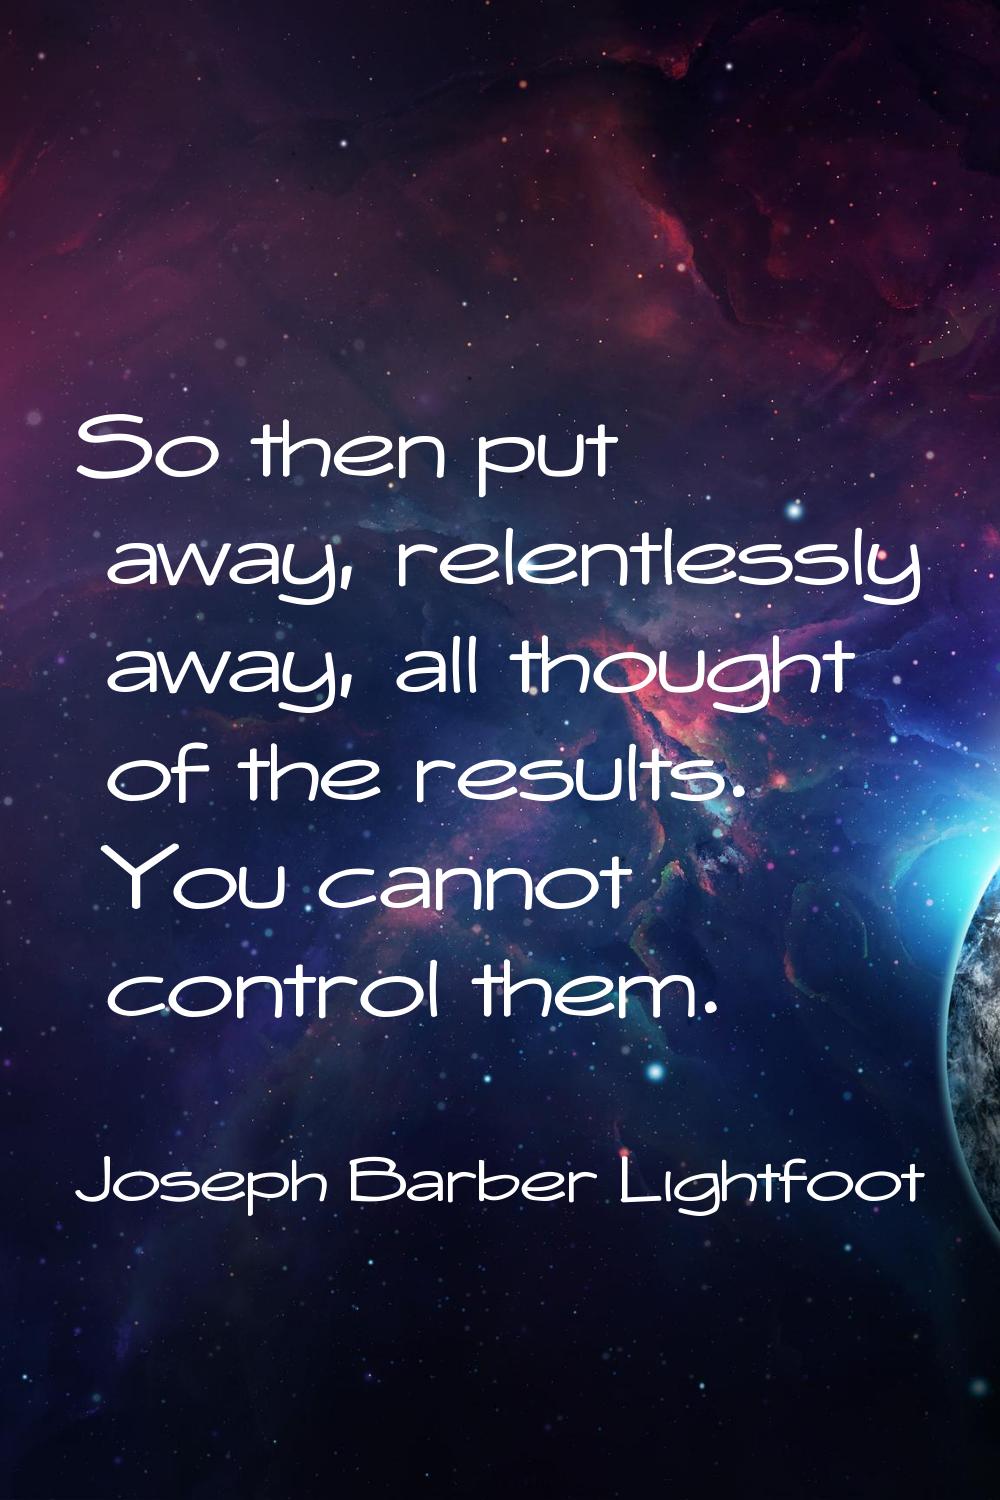 So then put away, relentlessly away, all thought of the results. You cannot control them.